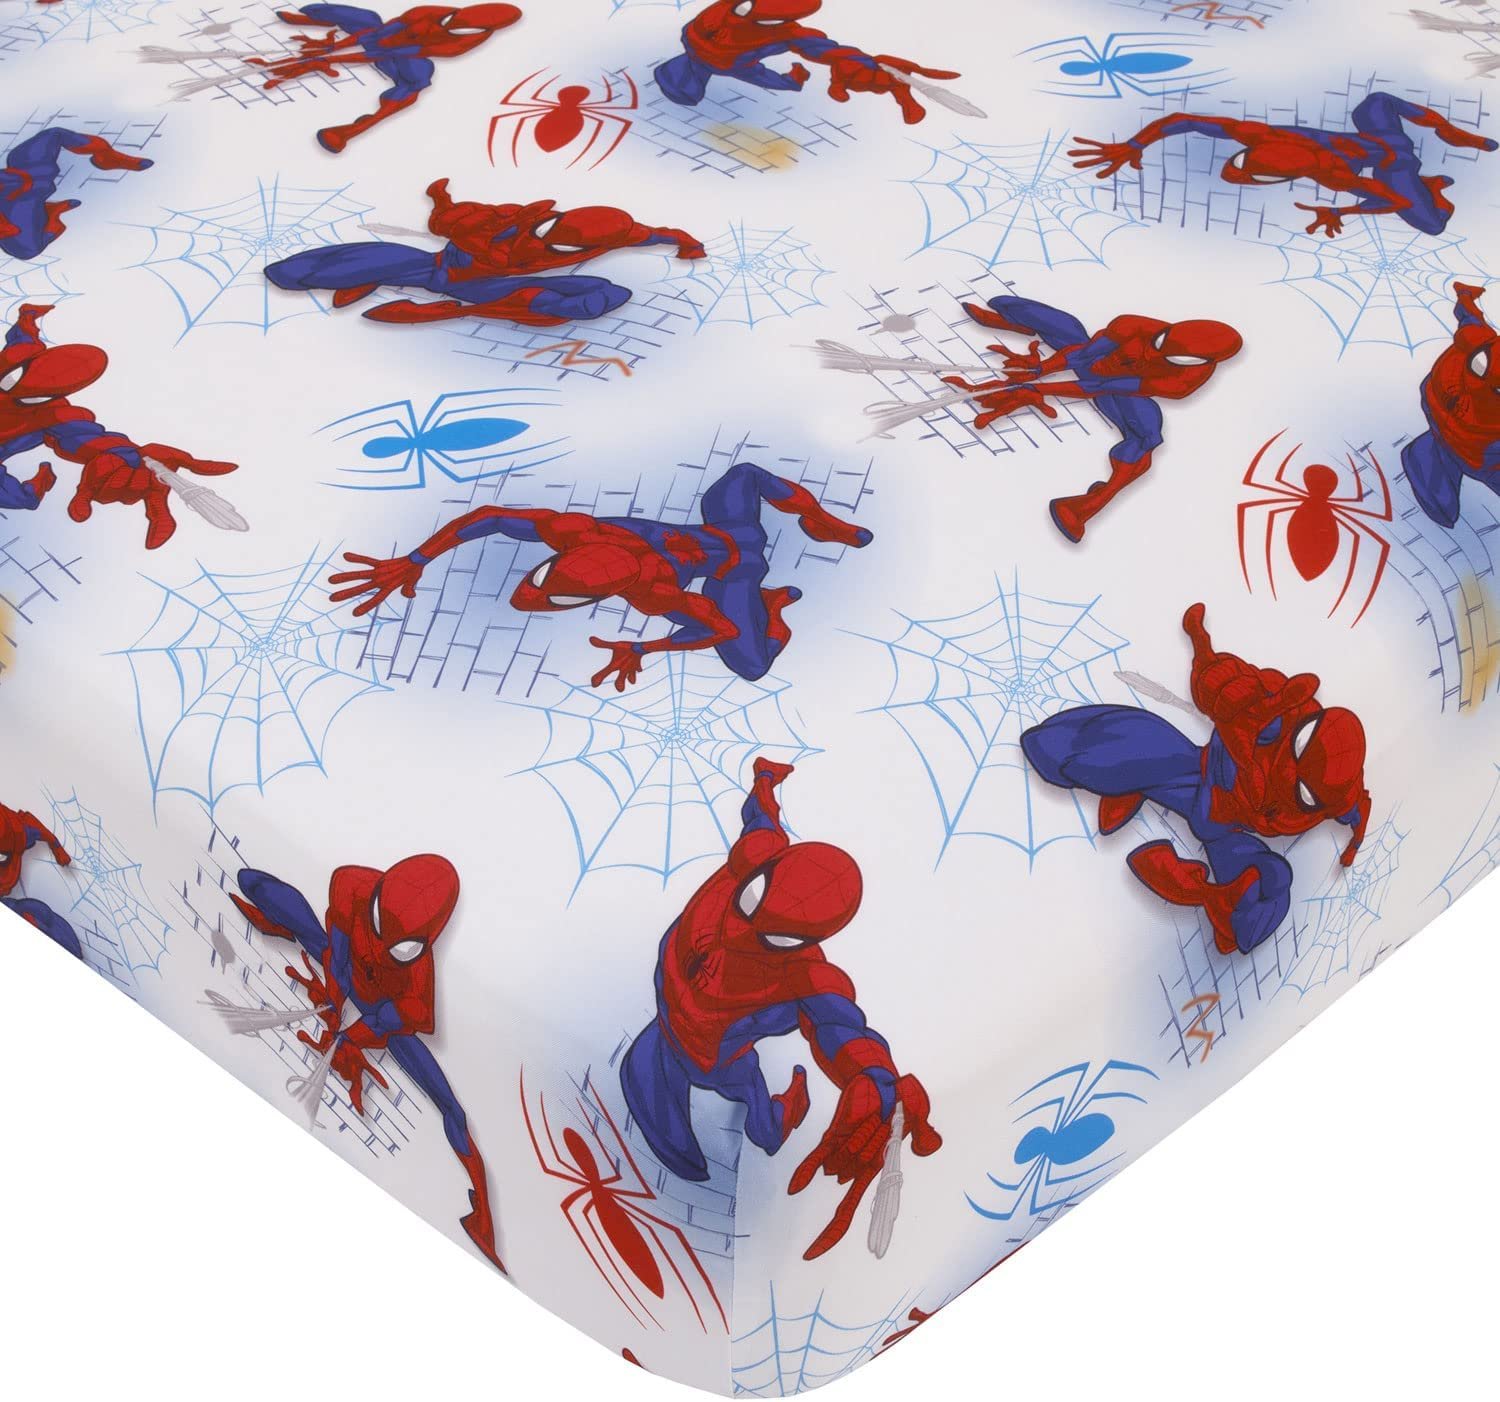 Marvel Spiderman Fitted Crib Sheet 100% Soft Microfiber, Baby Sheet, Fits Standard Size Crib Mattress 28in x 52in - image 1 of 4